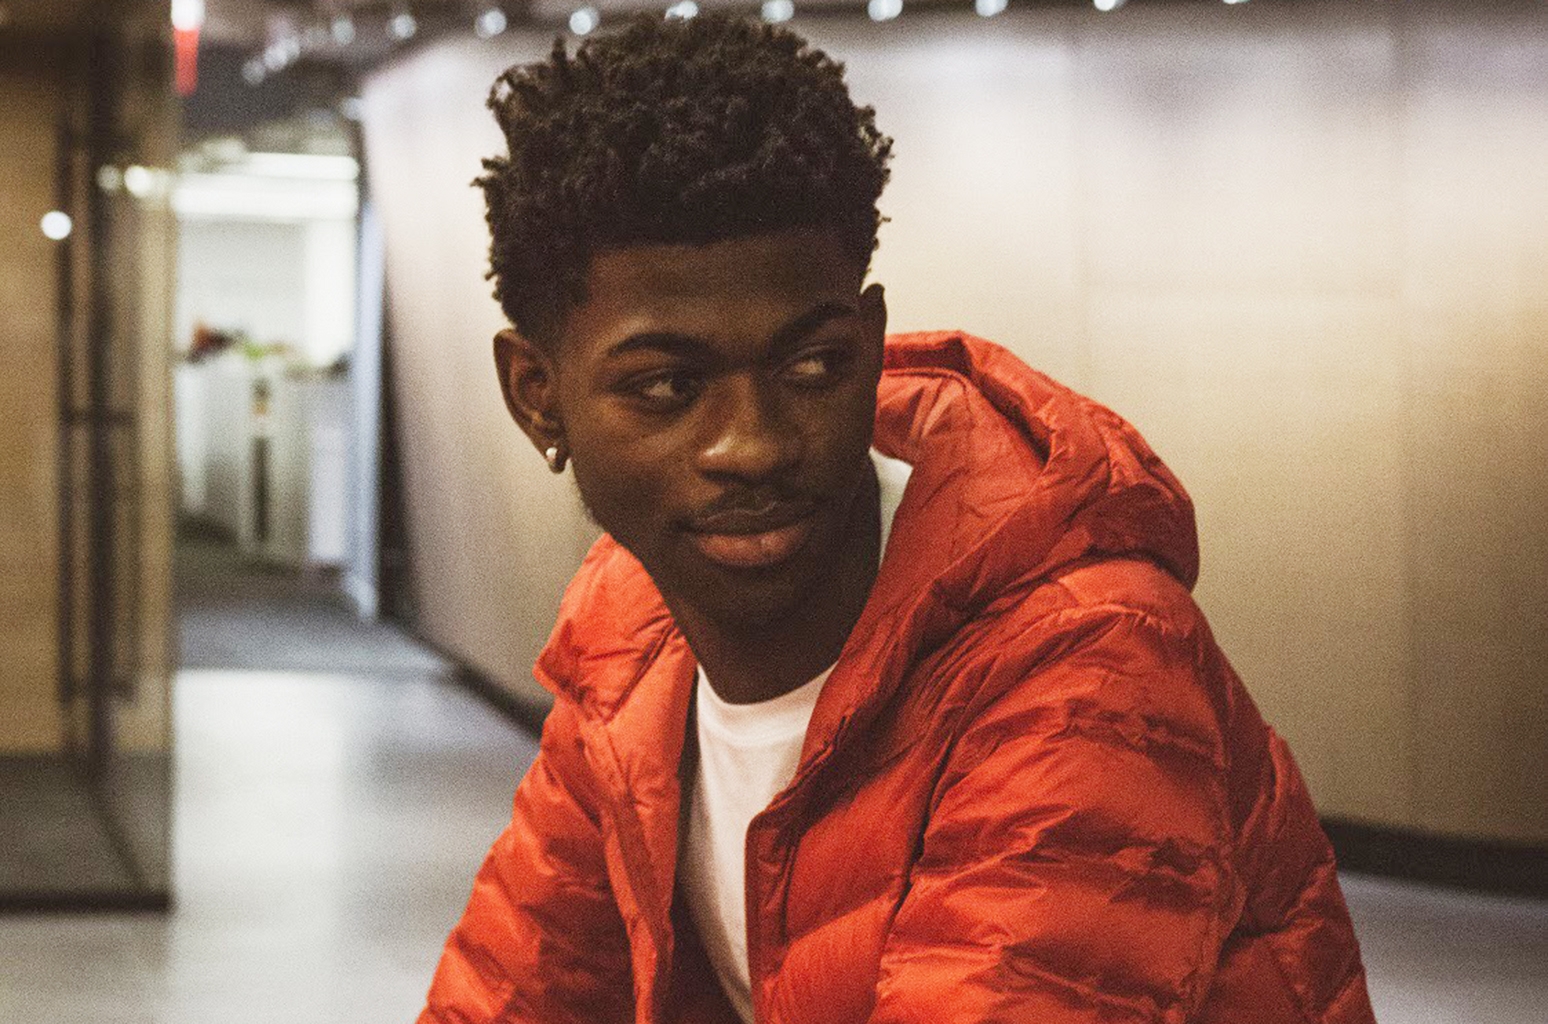 Lil Nas X’s ‘Old Town Road’ Leaps to No. 1 on Billboard Hot 100